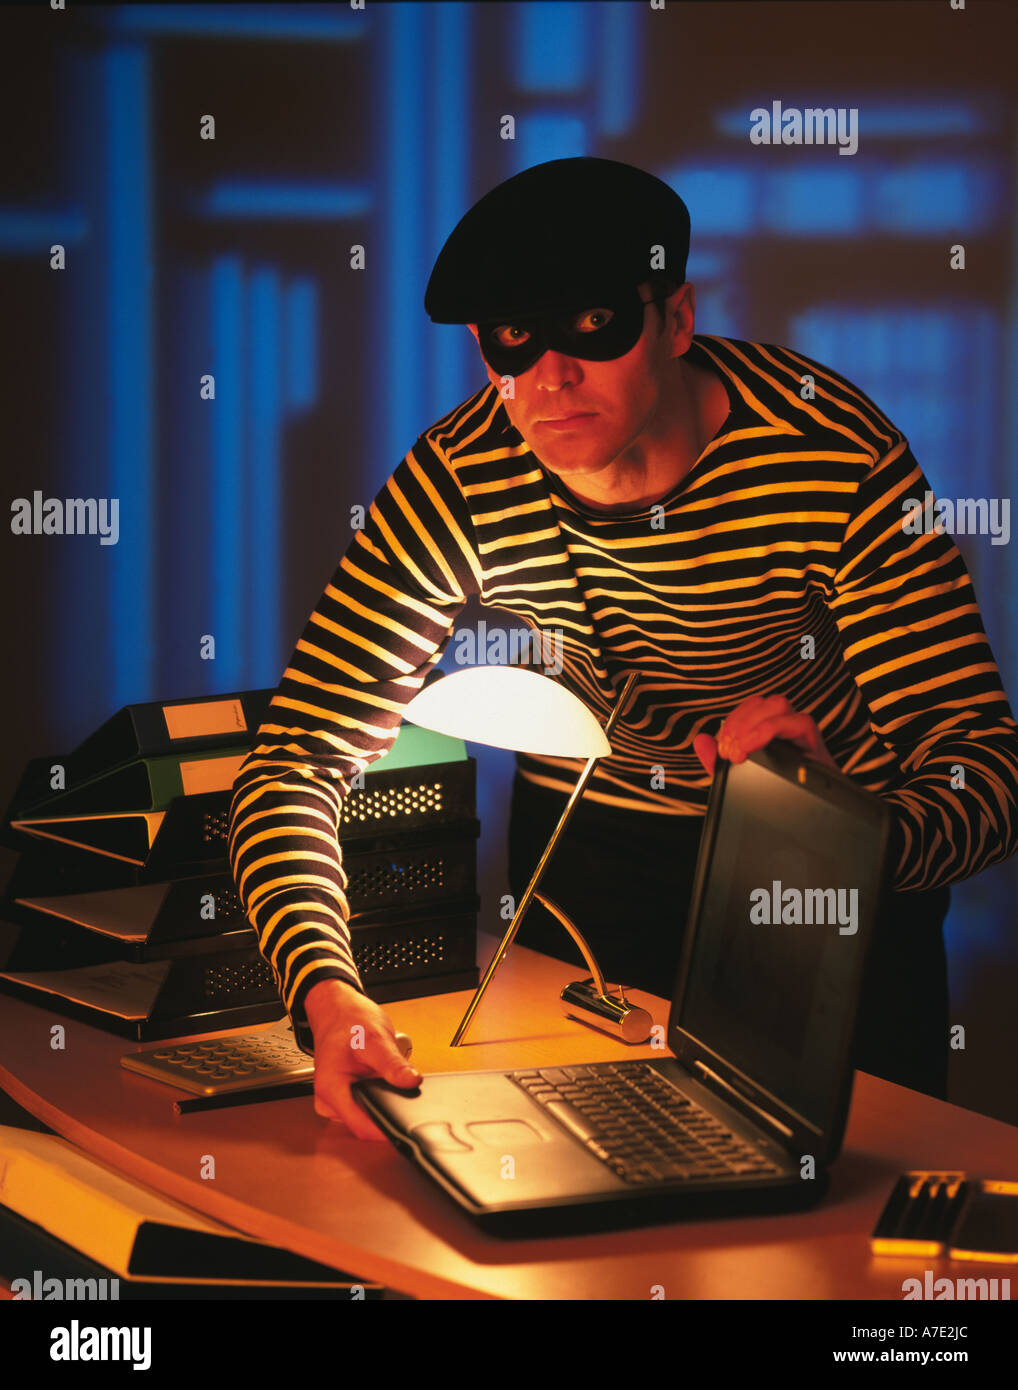 Burglar in traditional costume,Thief stealing a laptop computer Stock Photo